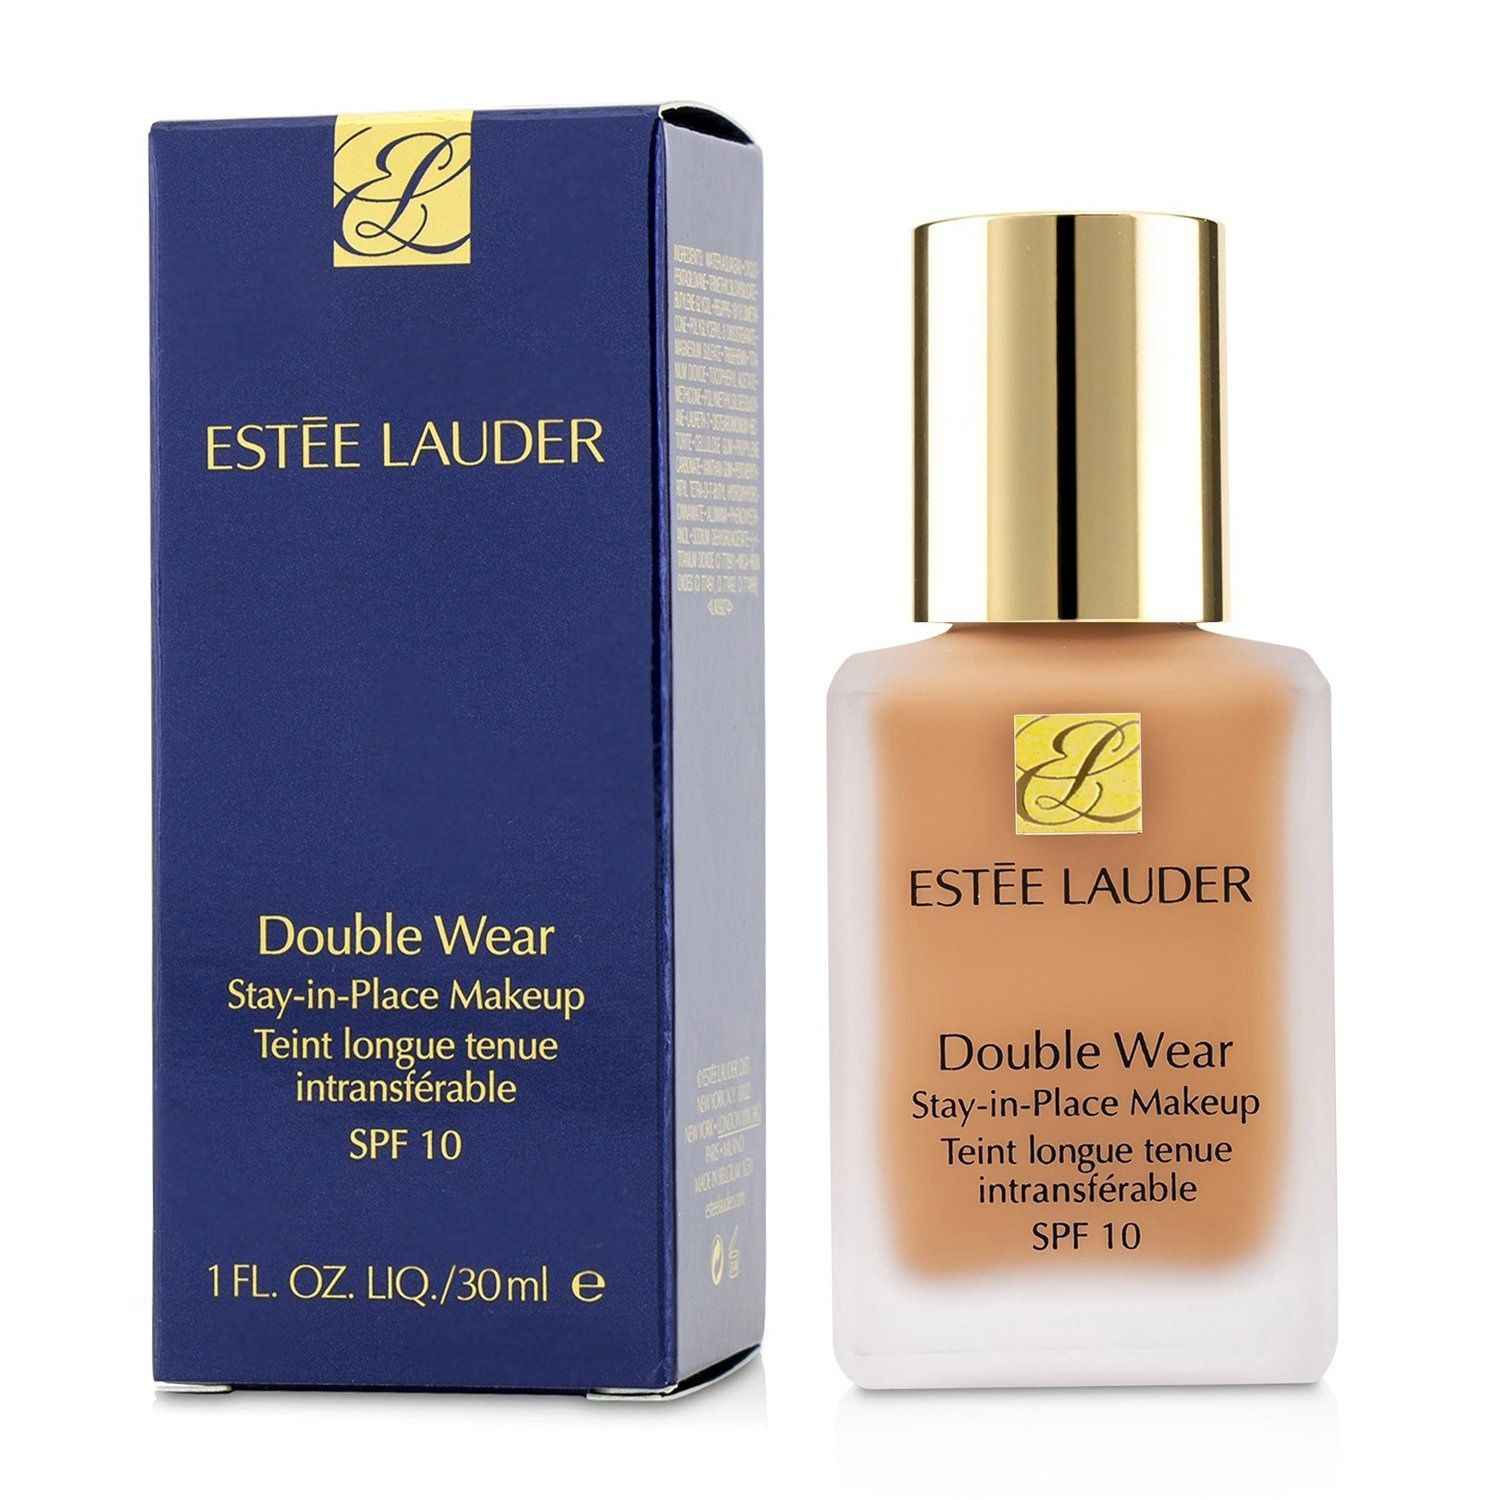 Estee Lauder Double Wear Stay-in Place Makeup Spf 10 - 2c1 Pure Beige 1 oz/30 ml - image 2 of 5